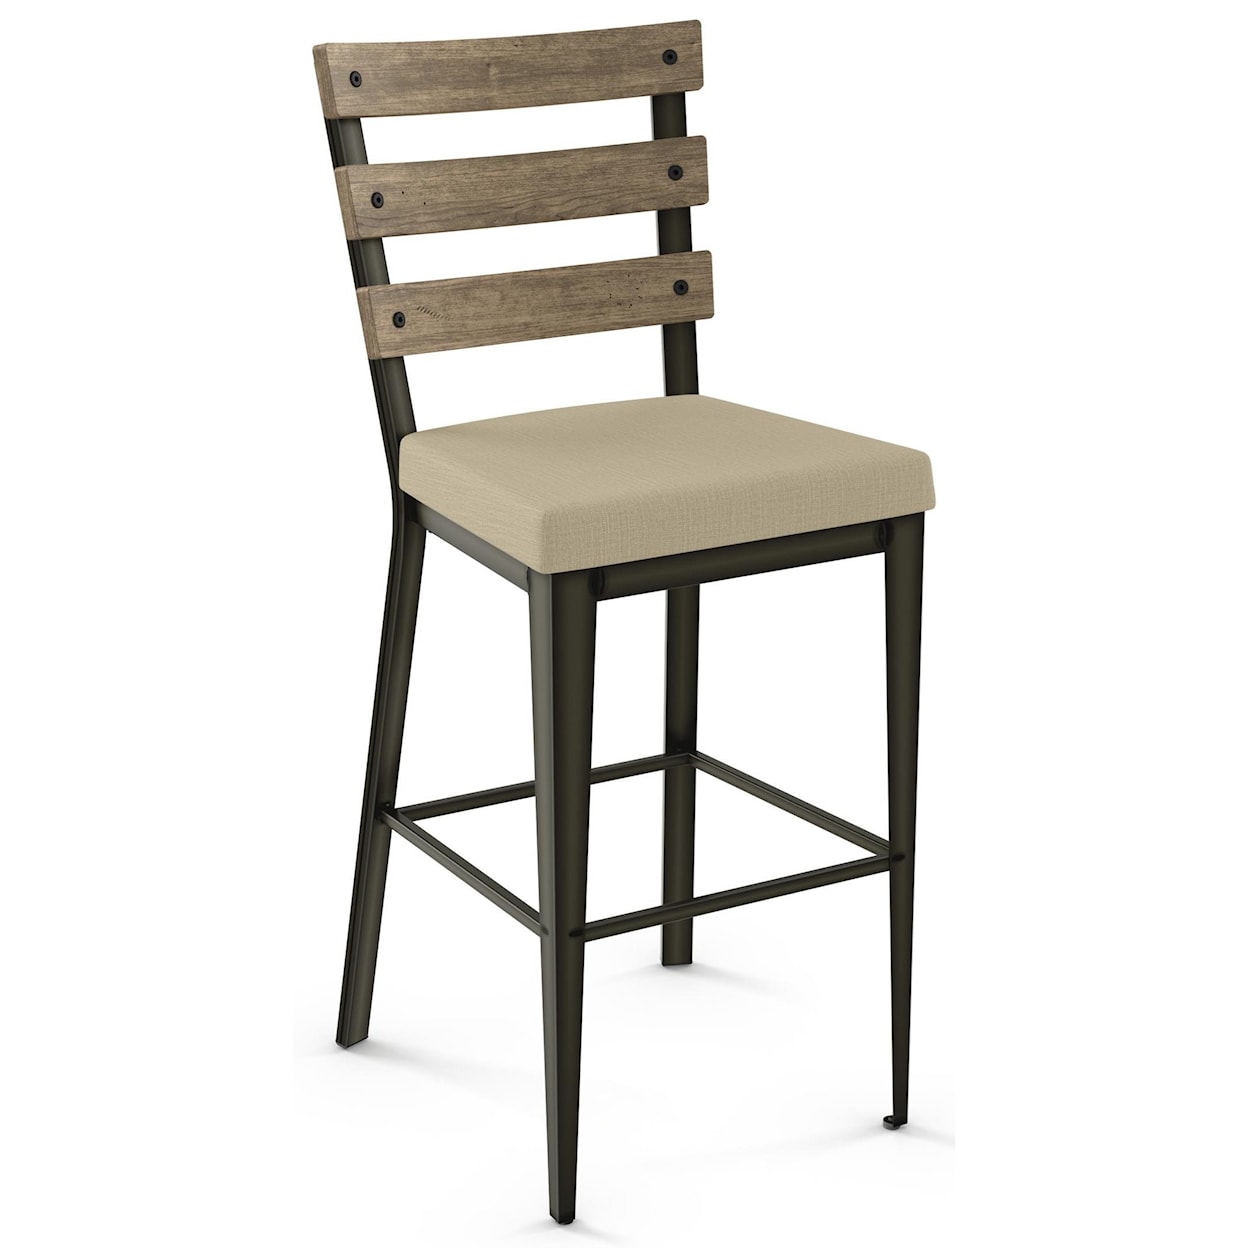 Amisco Industrial 30" Dexter Bar Stool with  Upholstered Seat